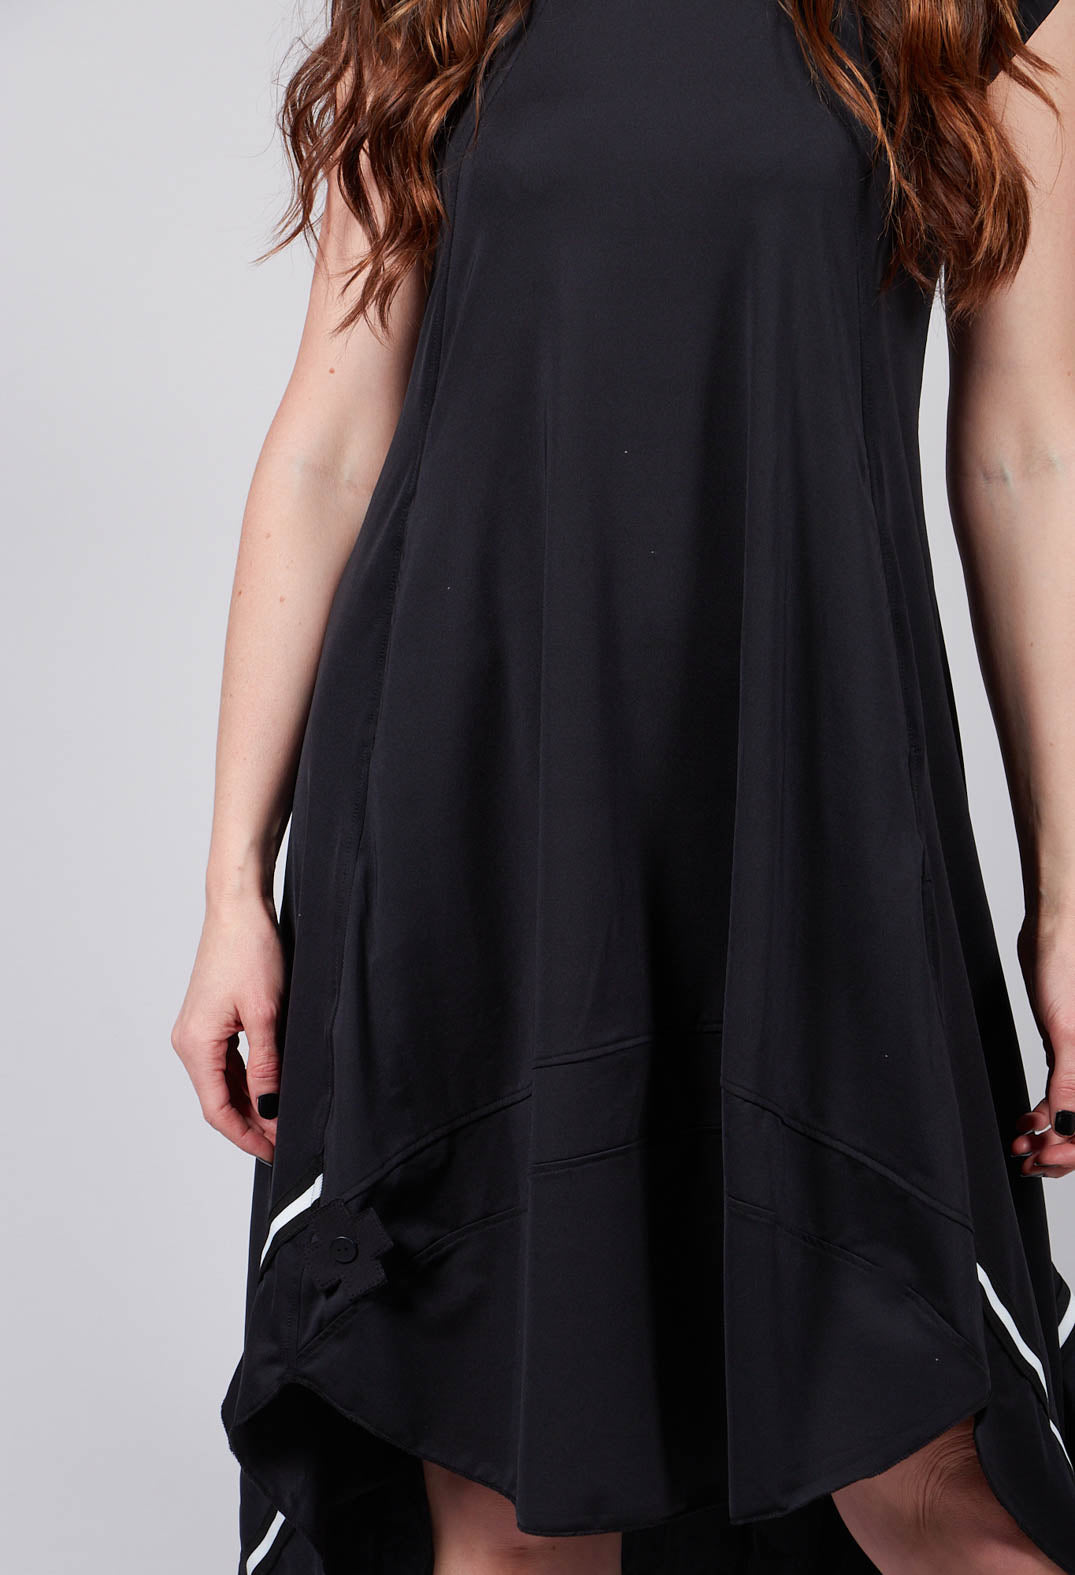 Capped Sleeve Dress in Black